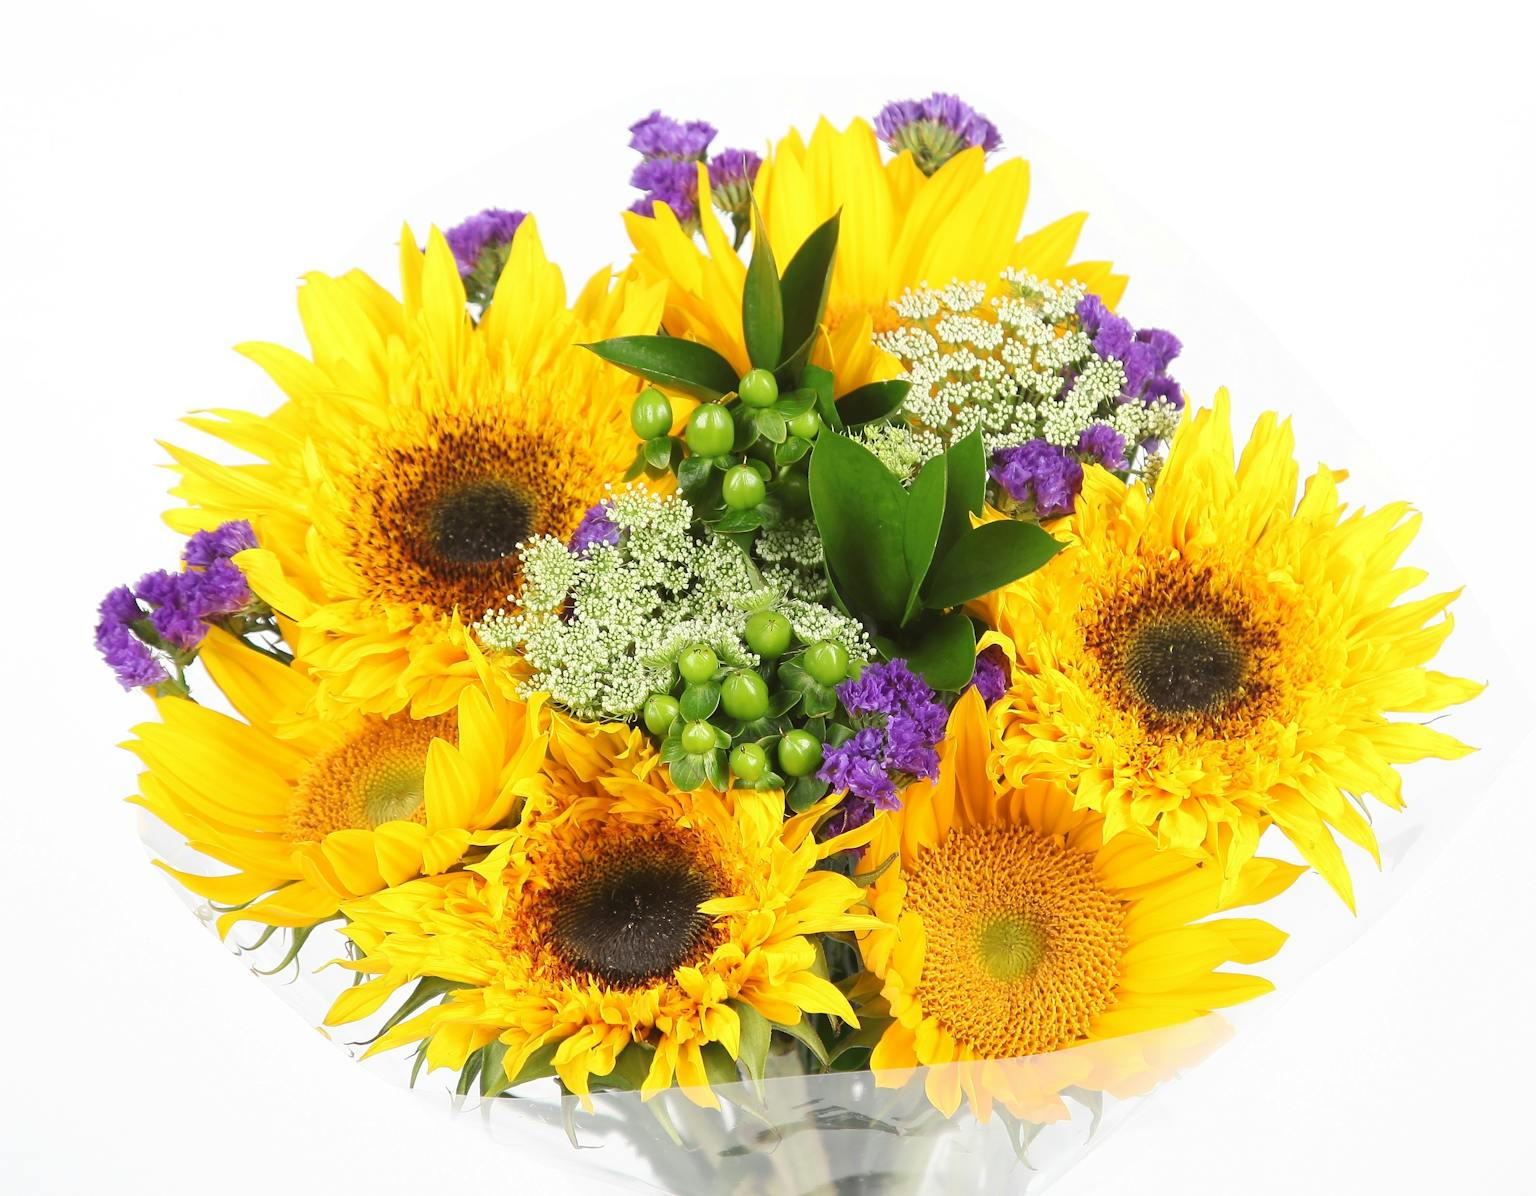 beautiful arrangement of yellow sunflowers and purple flowers with green leaves